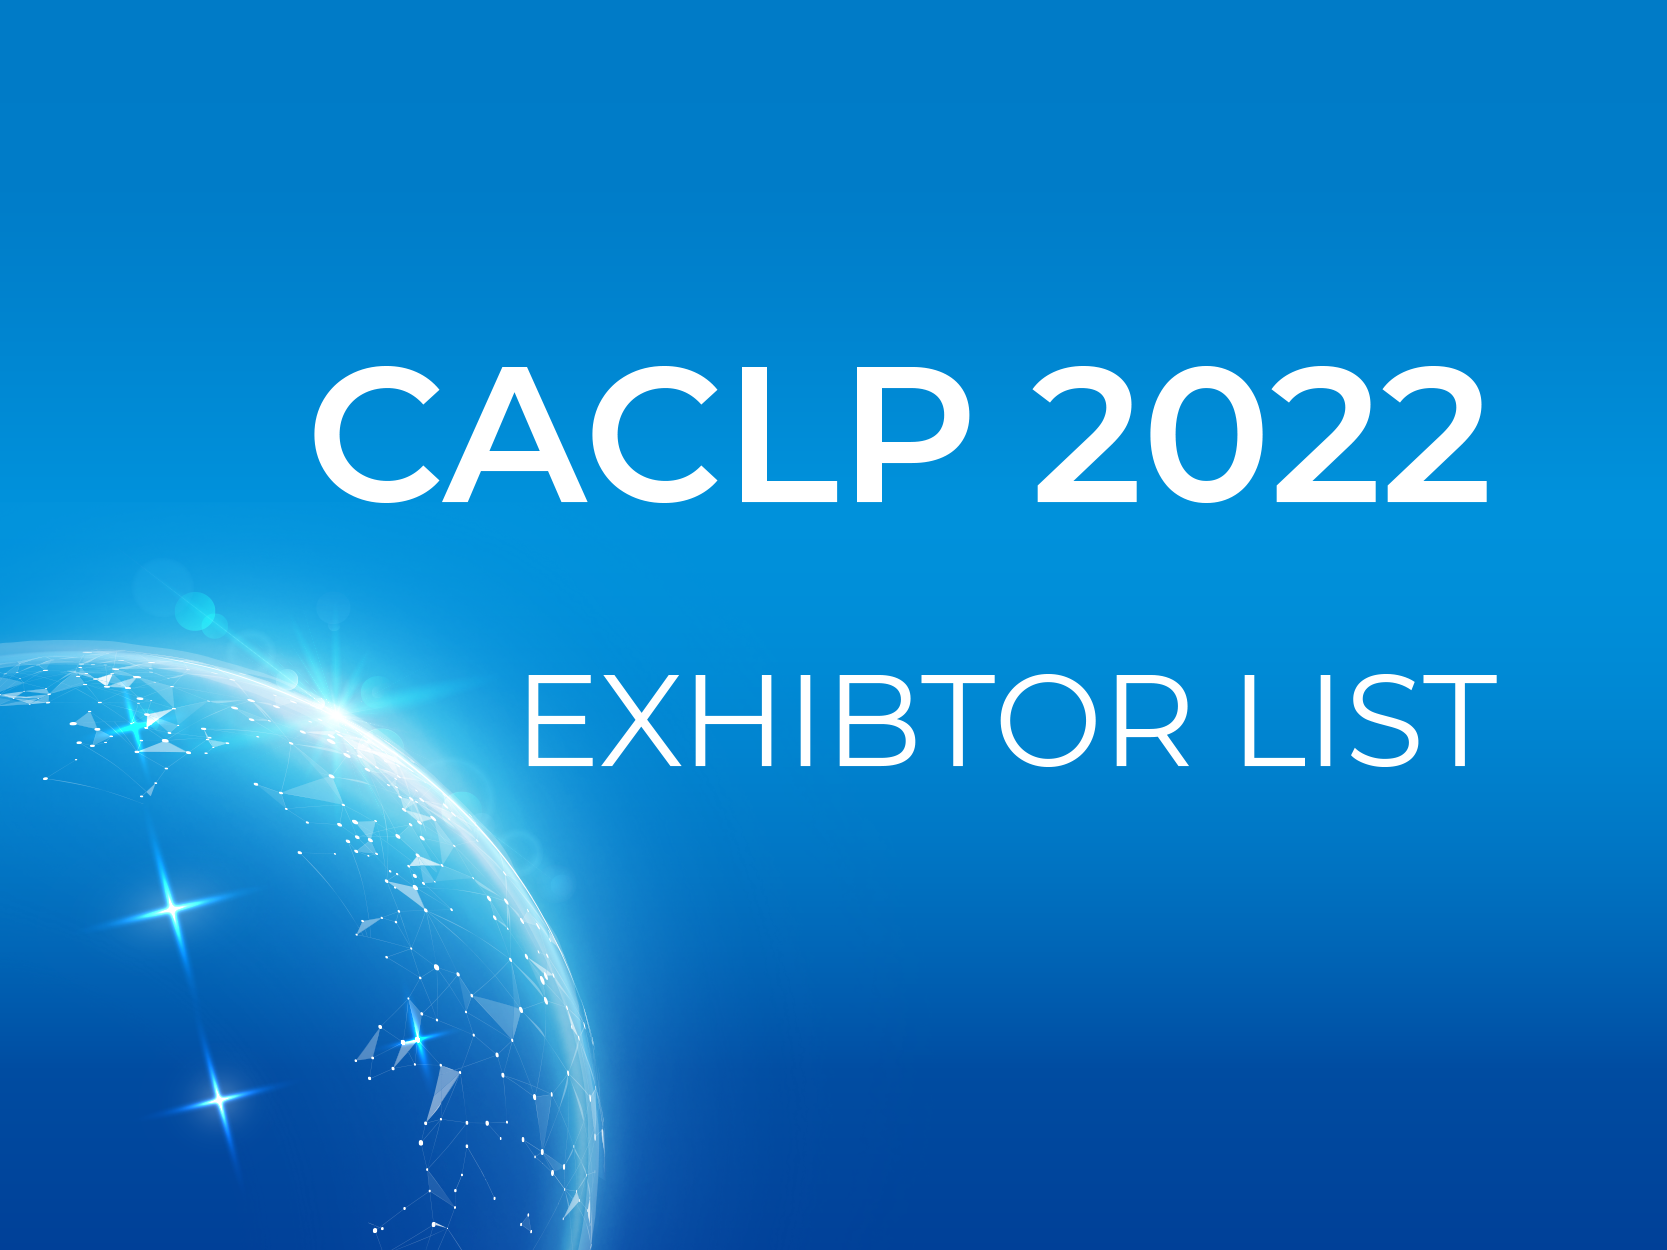 EXHIBITOR LIST OF CACLP 2022 (Updated to 16 August)